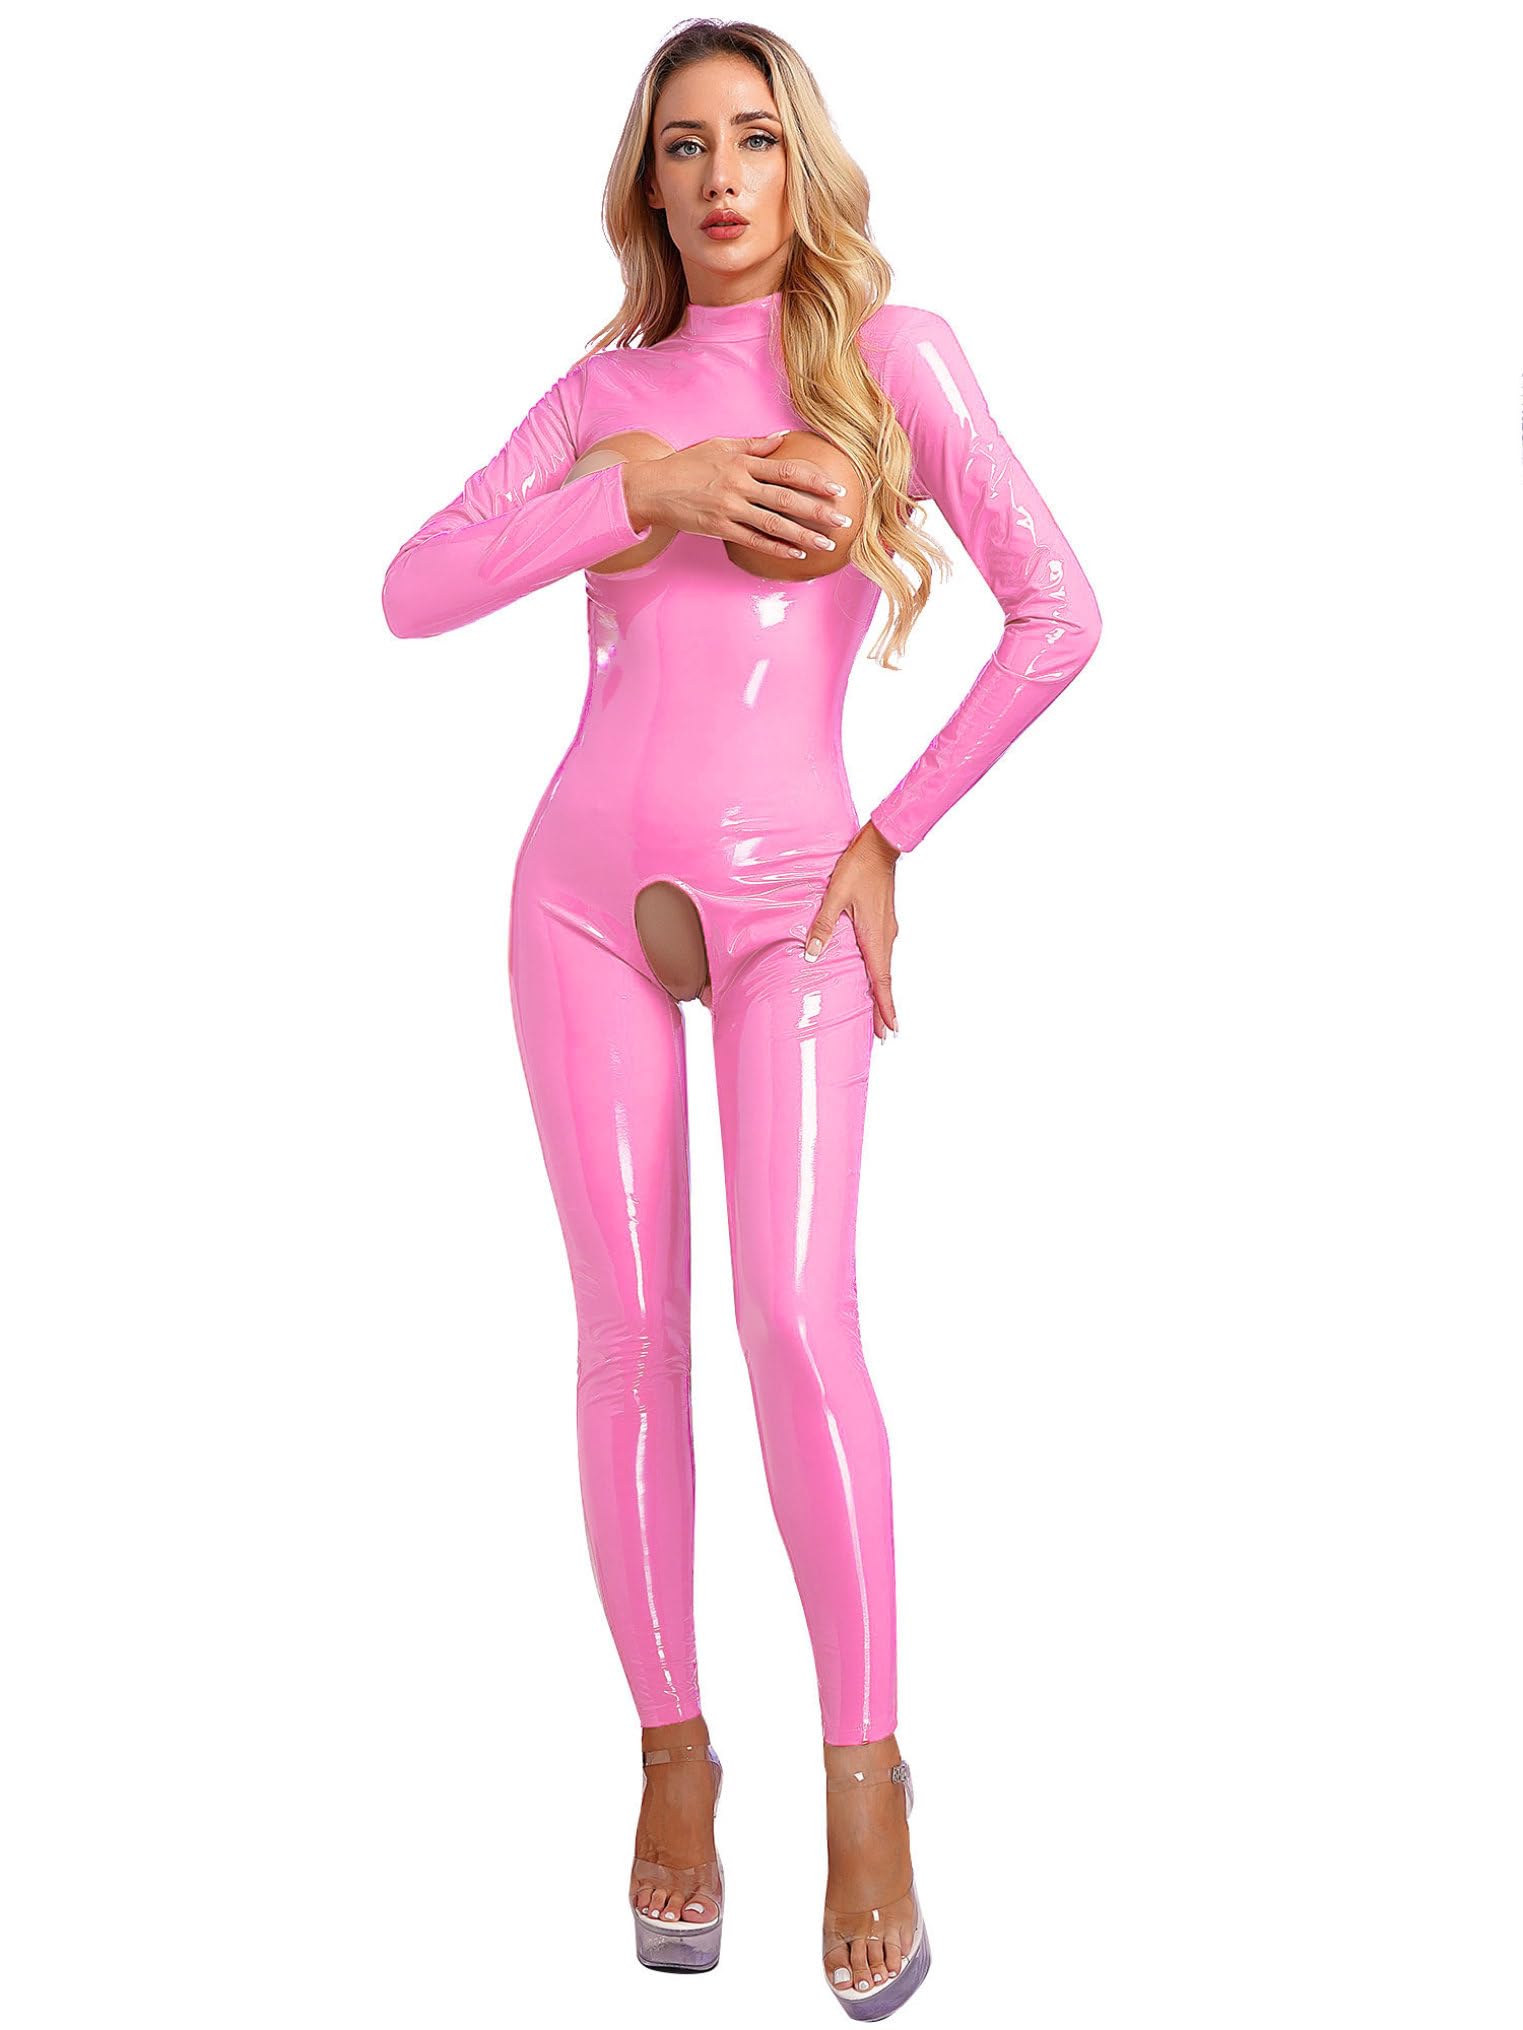 ACSUSS Women Sexy Hollow Out Latex Catsuit PVC Exotic Costume Lingerie Full Bodysuit Clubwear Overalls